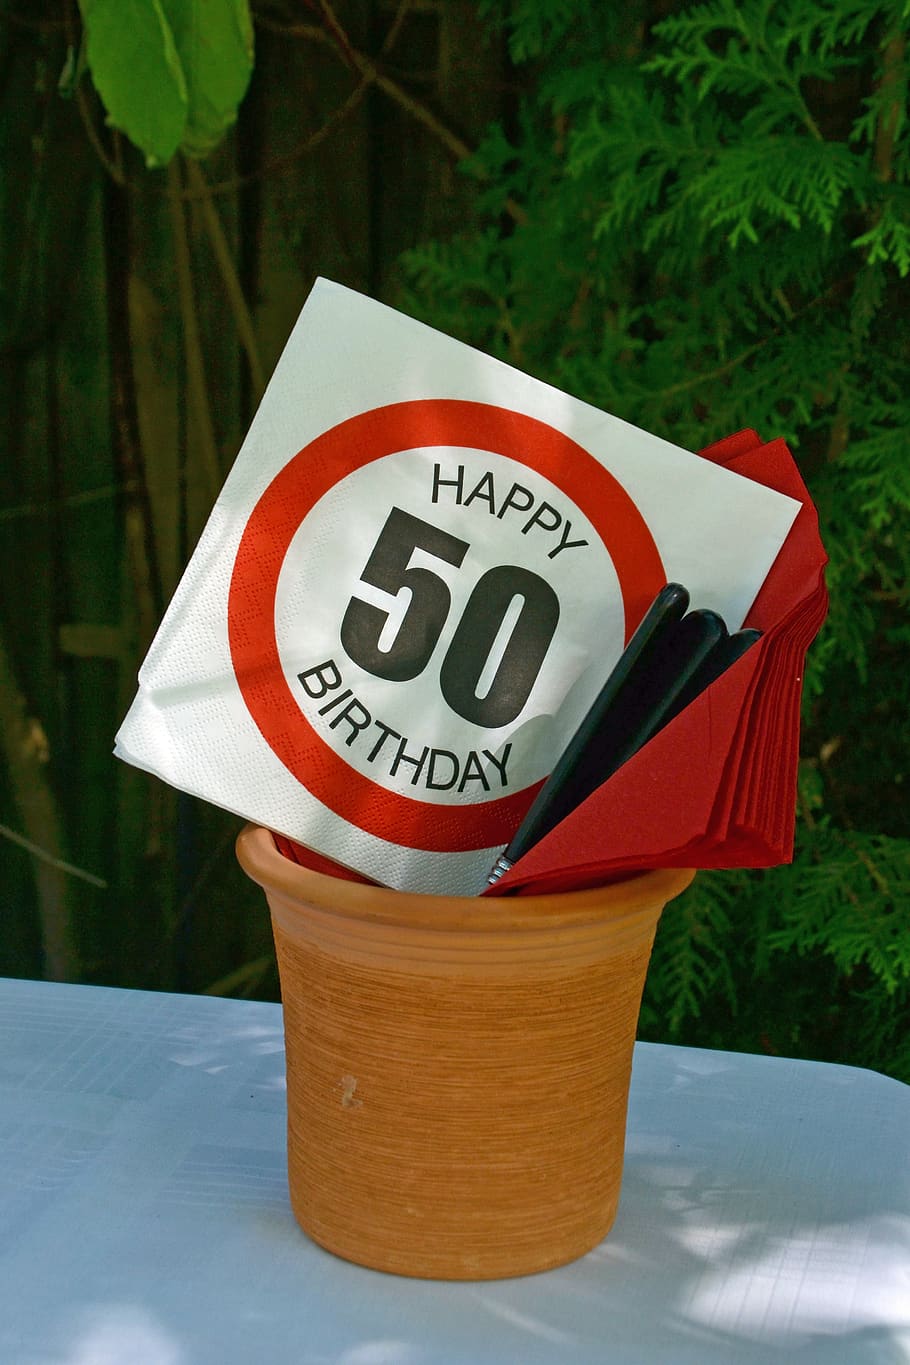 fiftieth birthday, 50th birthday, 50, birthday, at the age of 50, fifty years old, 50 birthday, 50s party, birthday party 50, table decoration